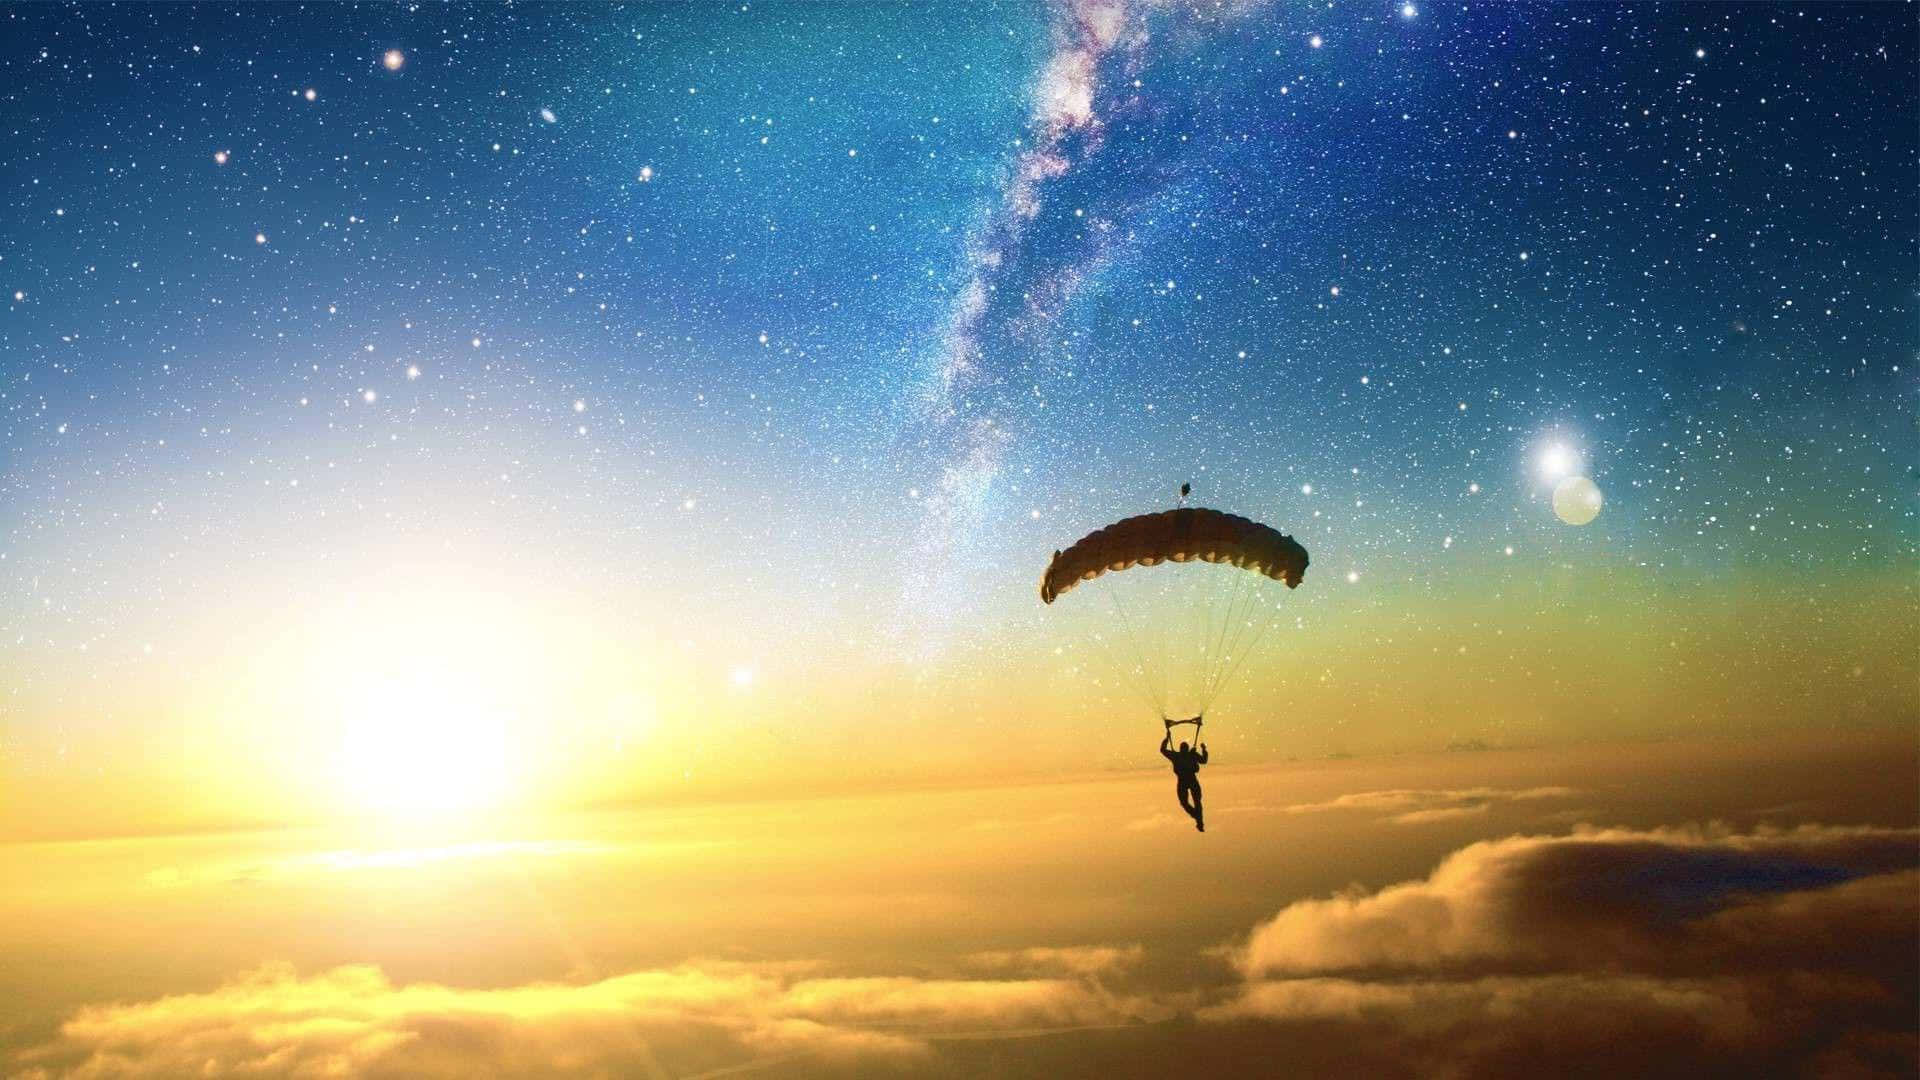 Skydiving Silhouette Sunset View Wallpaper